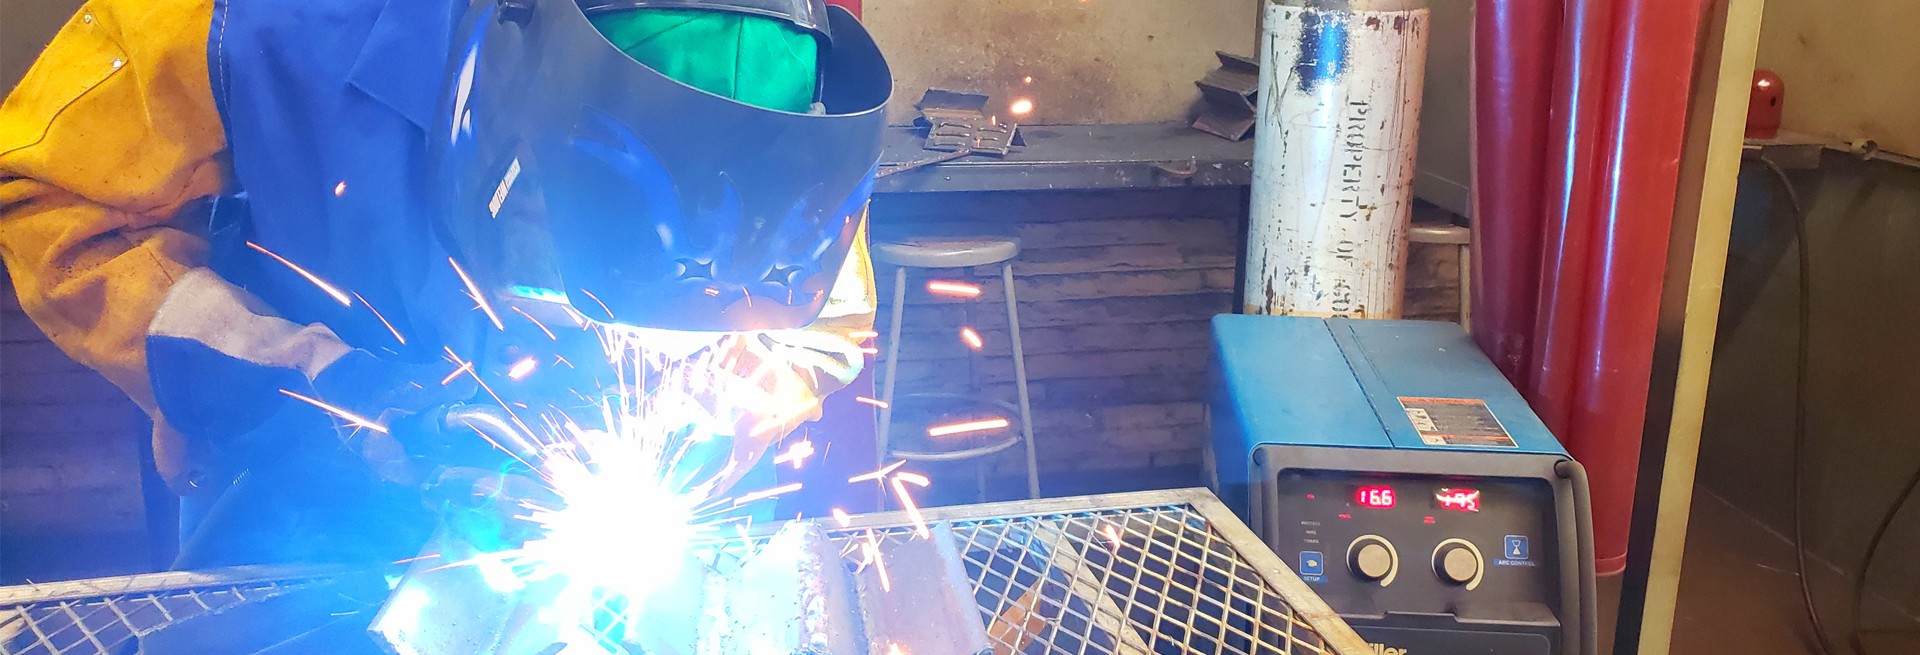 A person is welding some metal together, wearing a welding suit and helmet